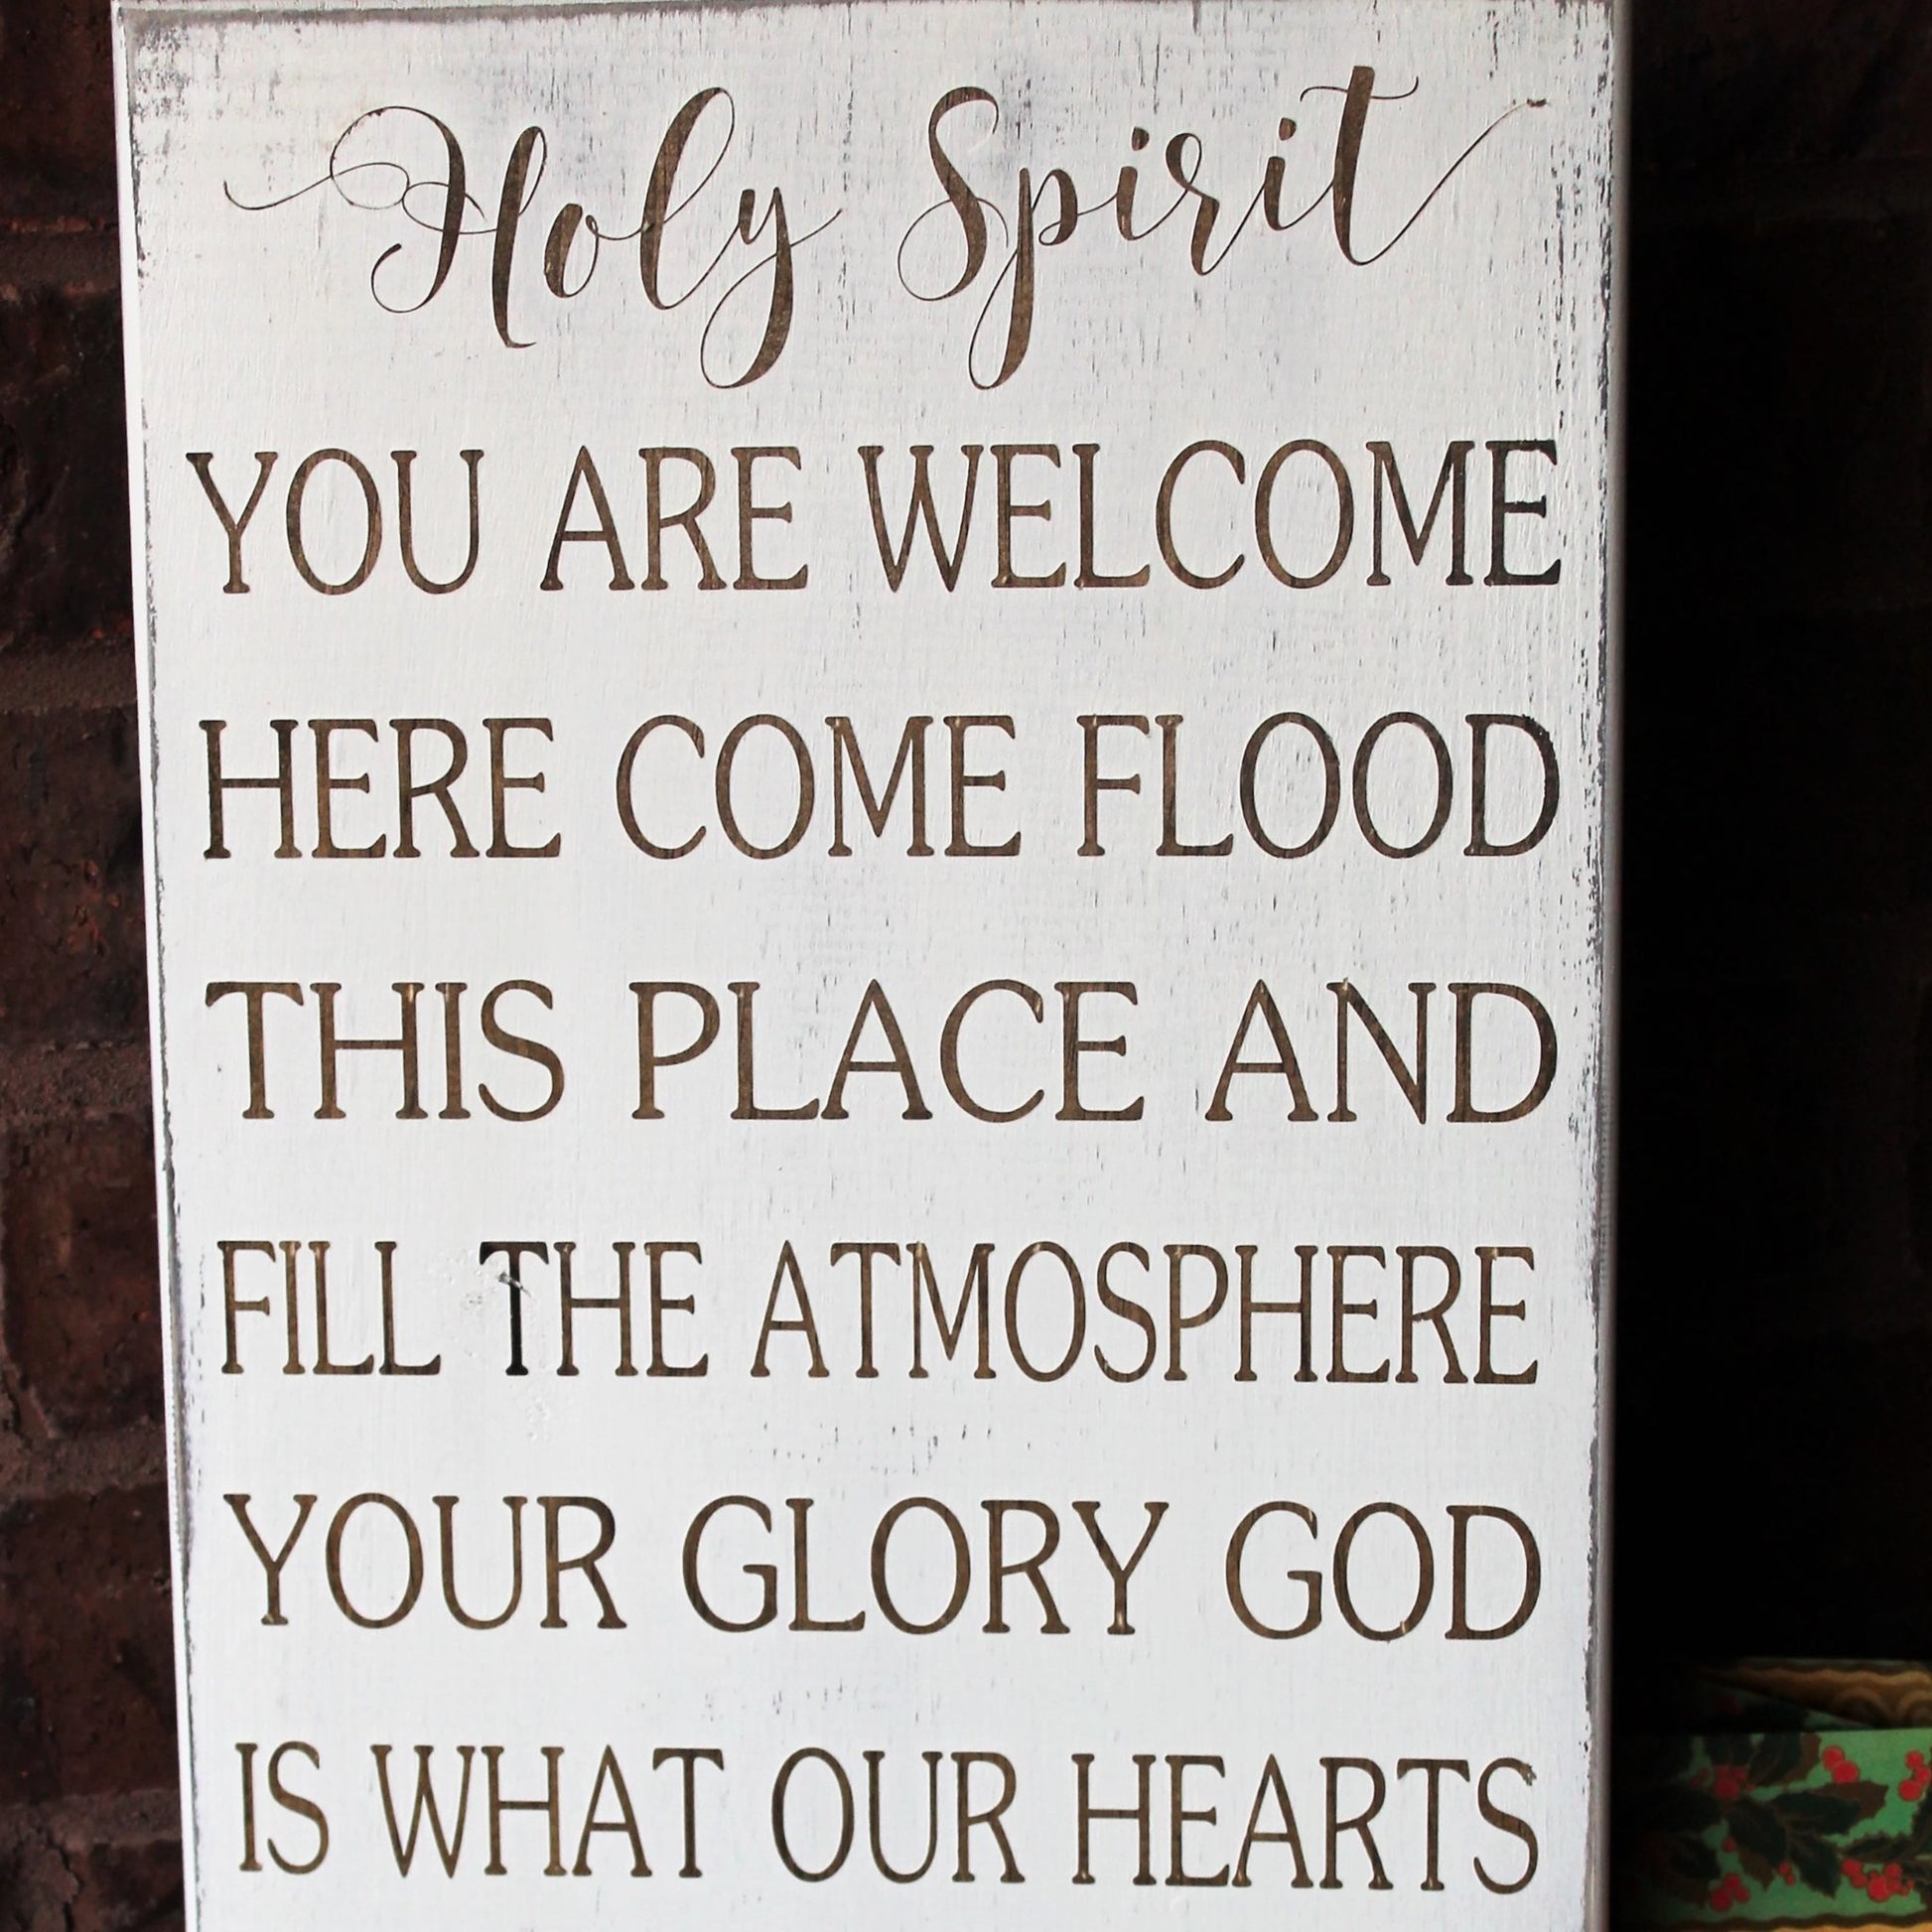 holy spirit you are welcome here